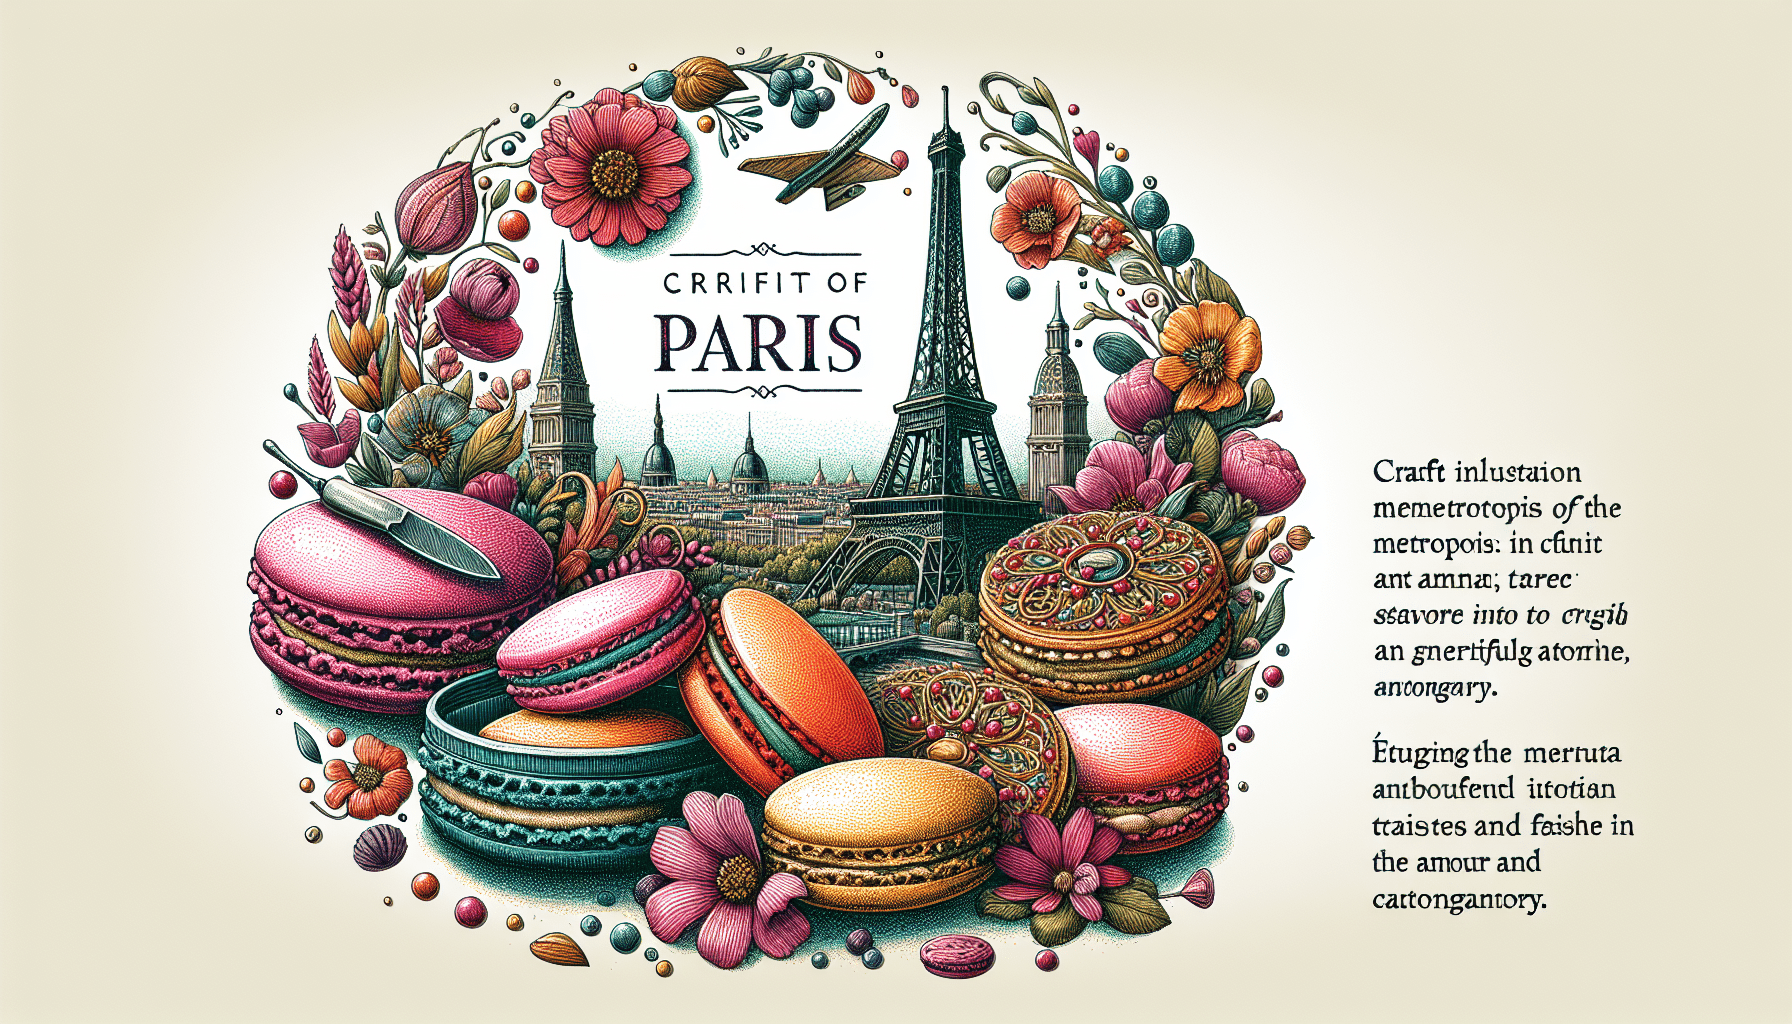 Paris: The City of Love and Food